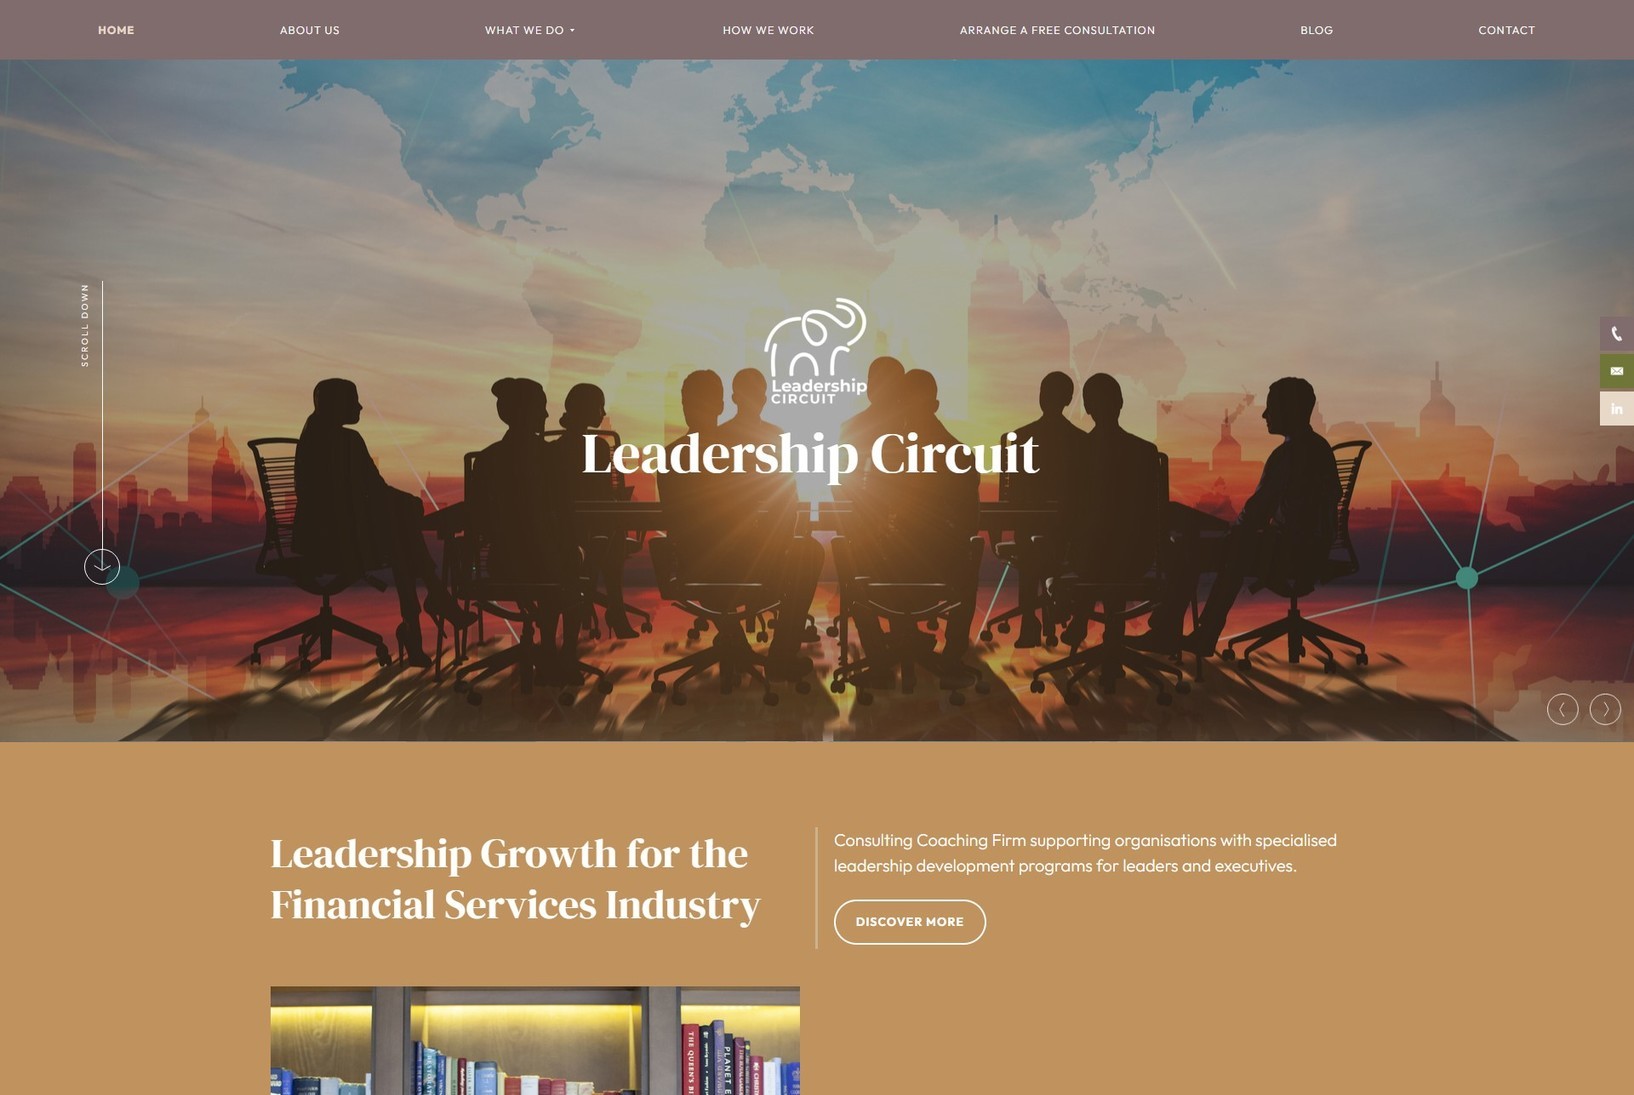 A website design to help build leaders throughout Windsor.